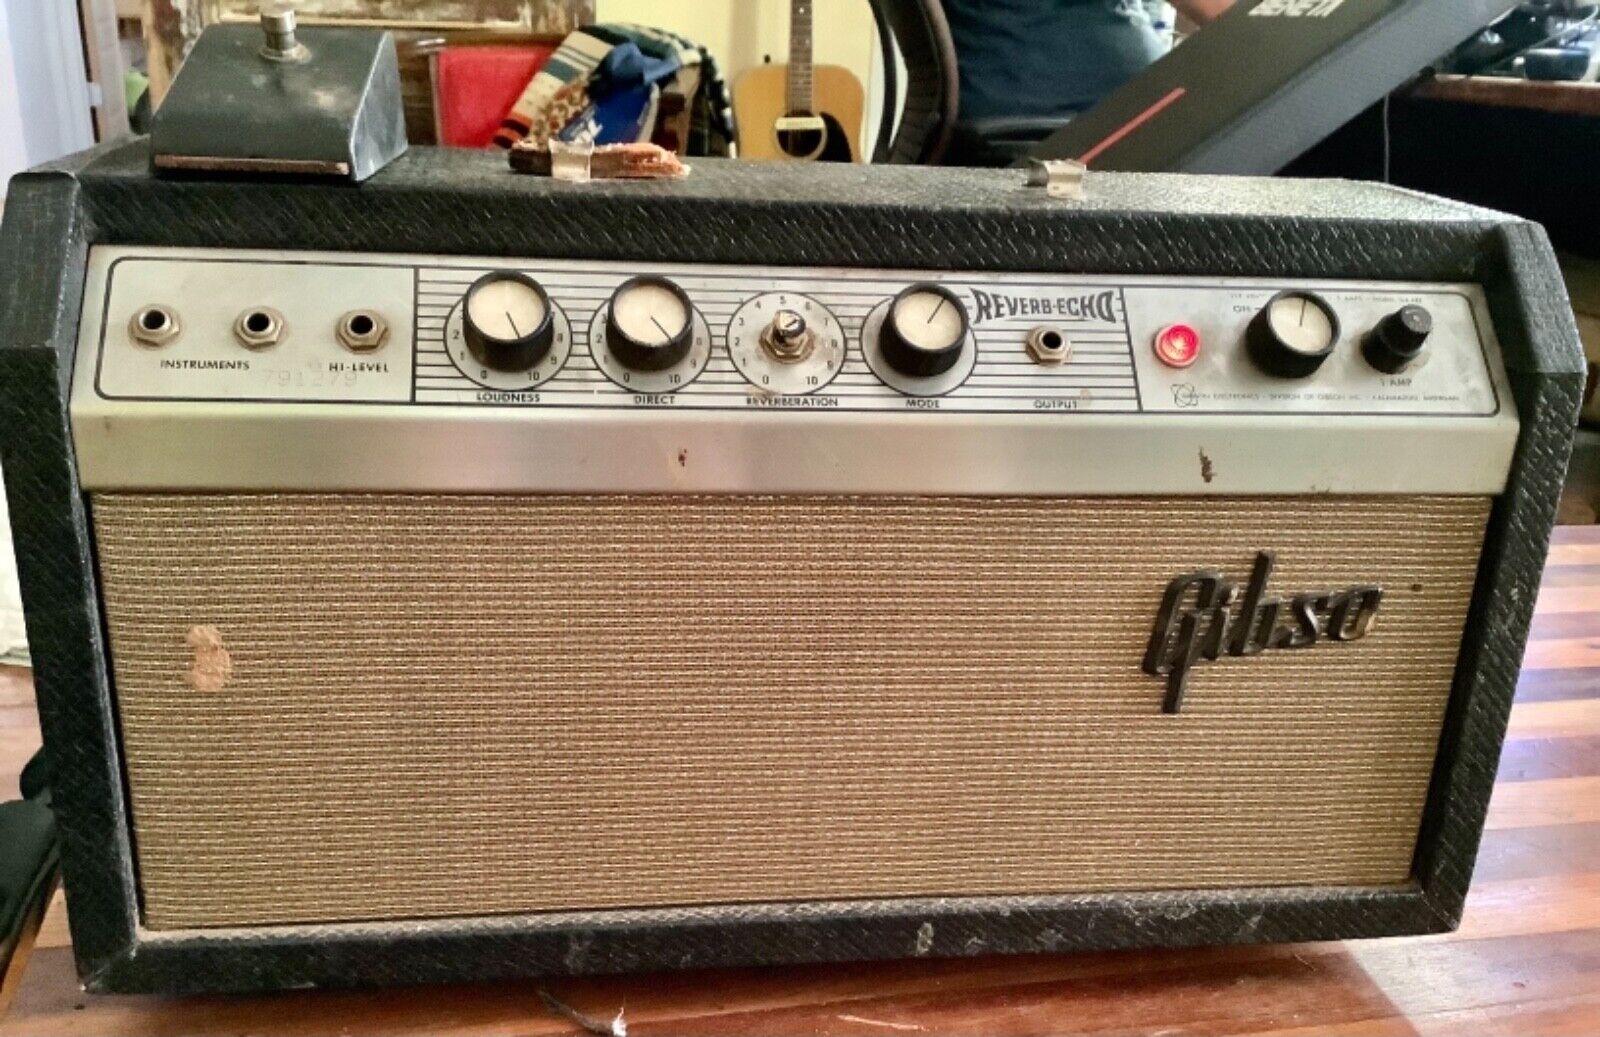 Vintage RARE GIBSON MODEL GA-4re REVERB-ECHO GUITAR AMP with pedal